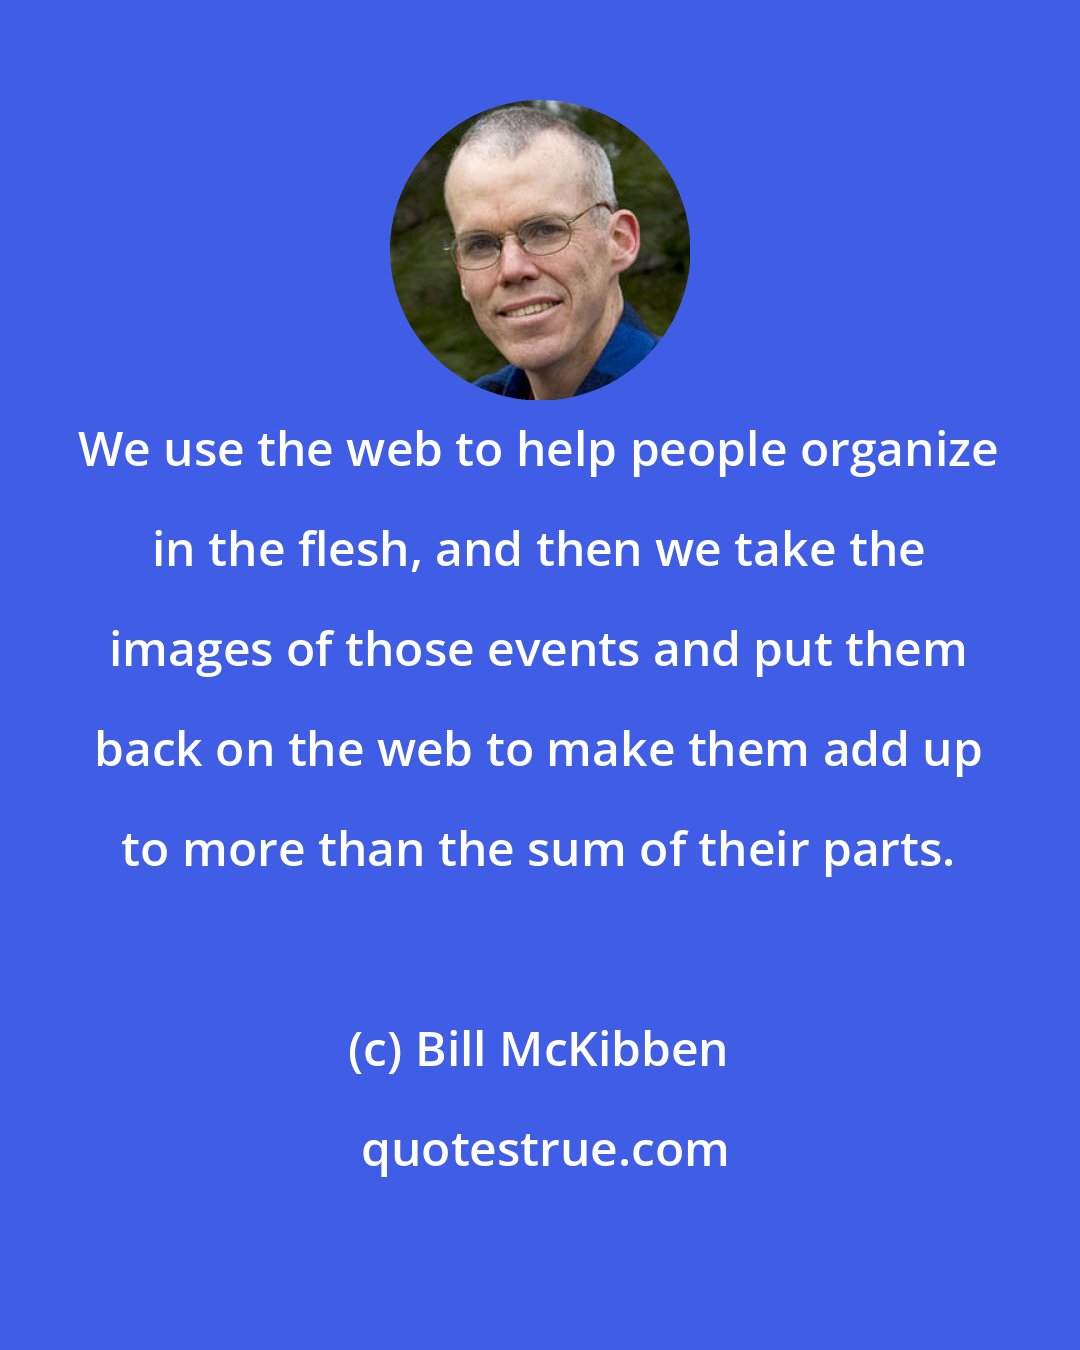 Bill McKibben: We use the web to help people organize in the flesh, and then we take the images of those events and put them back on the web to make them add up to more than the sum of their parts.